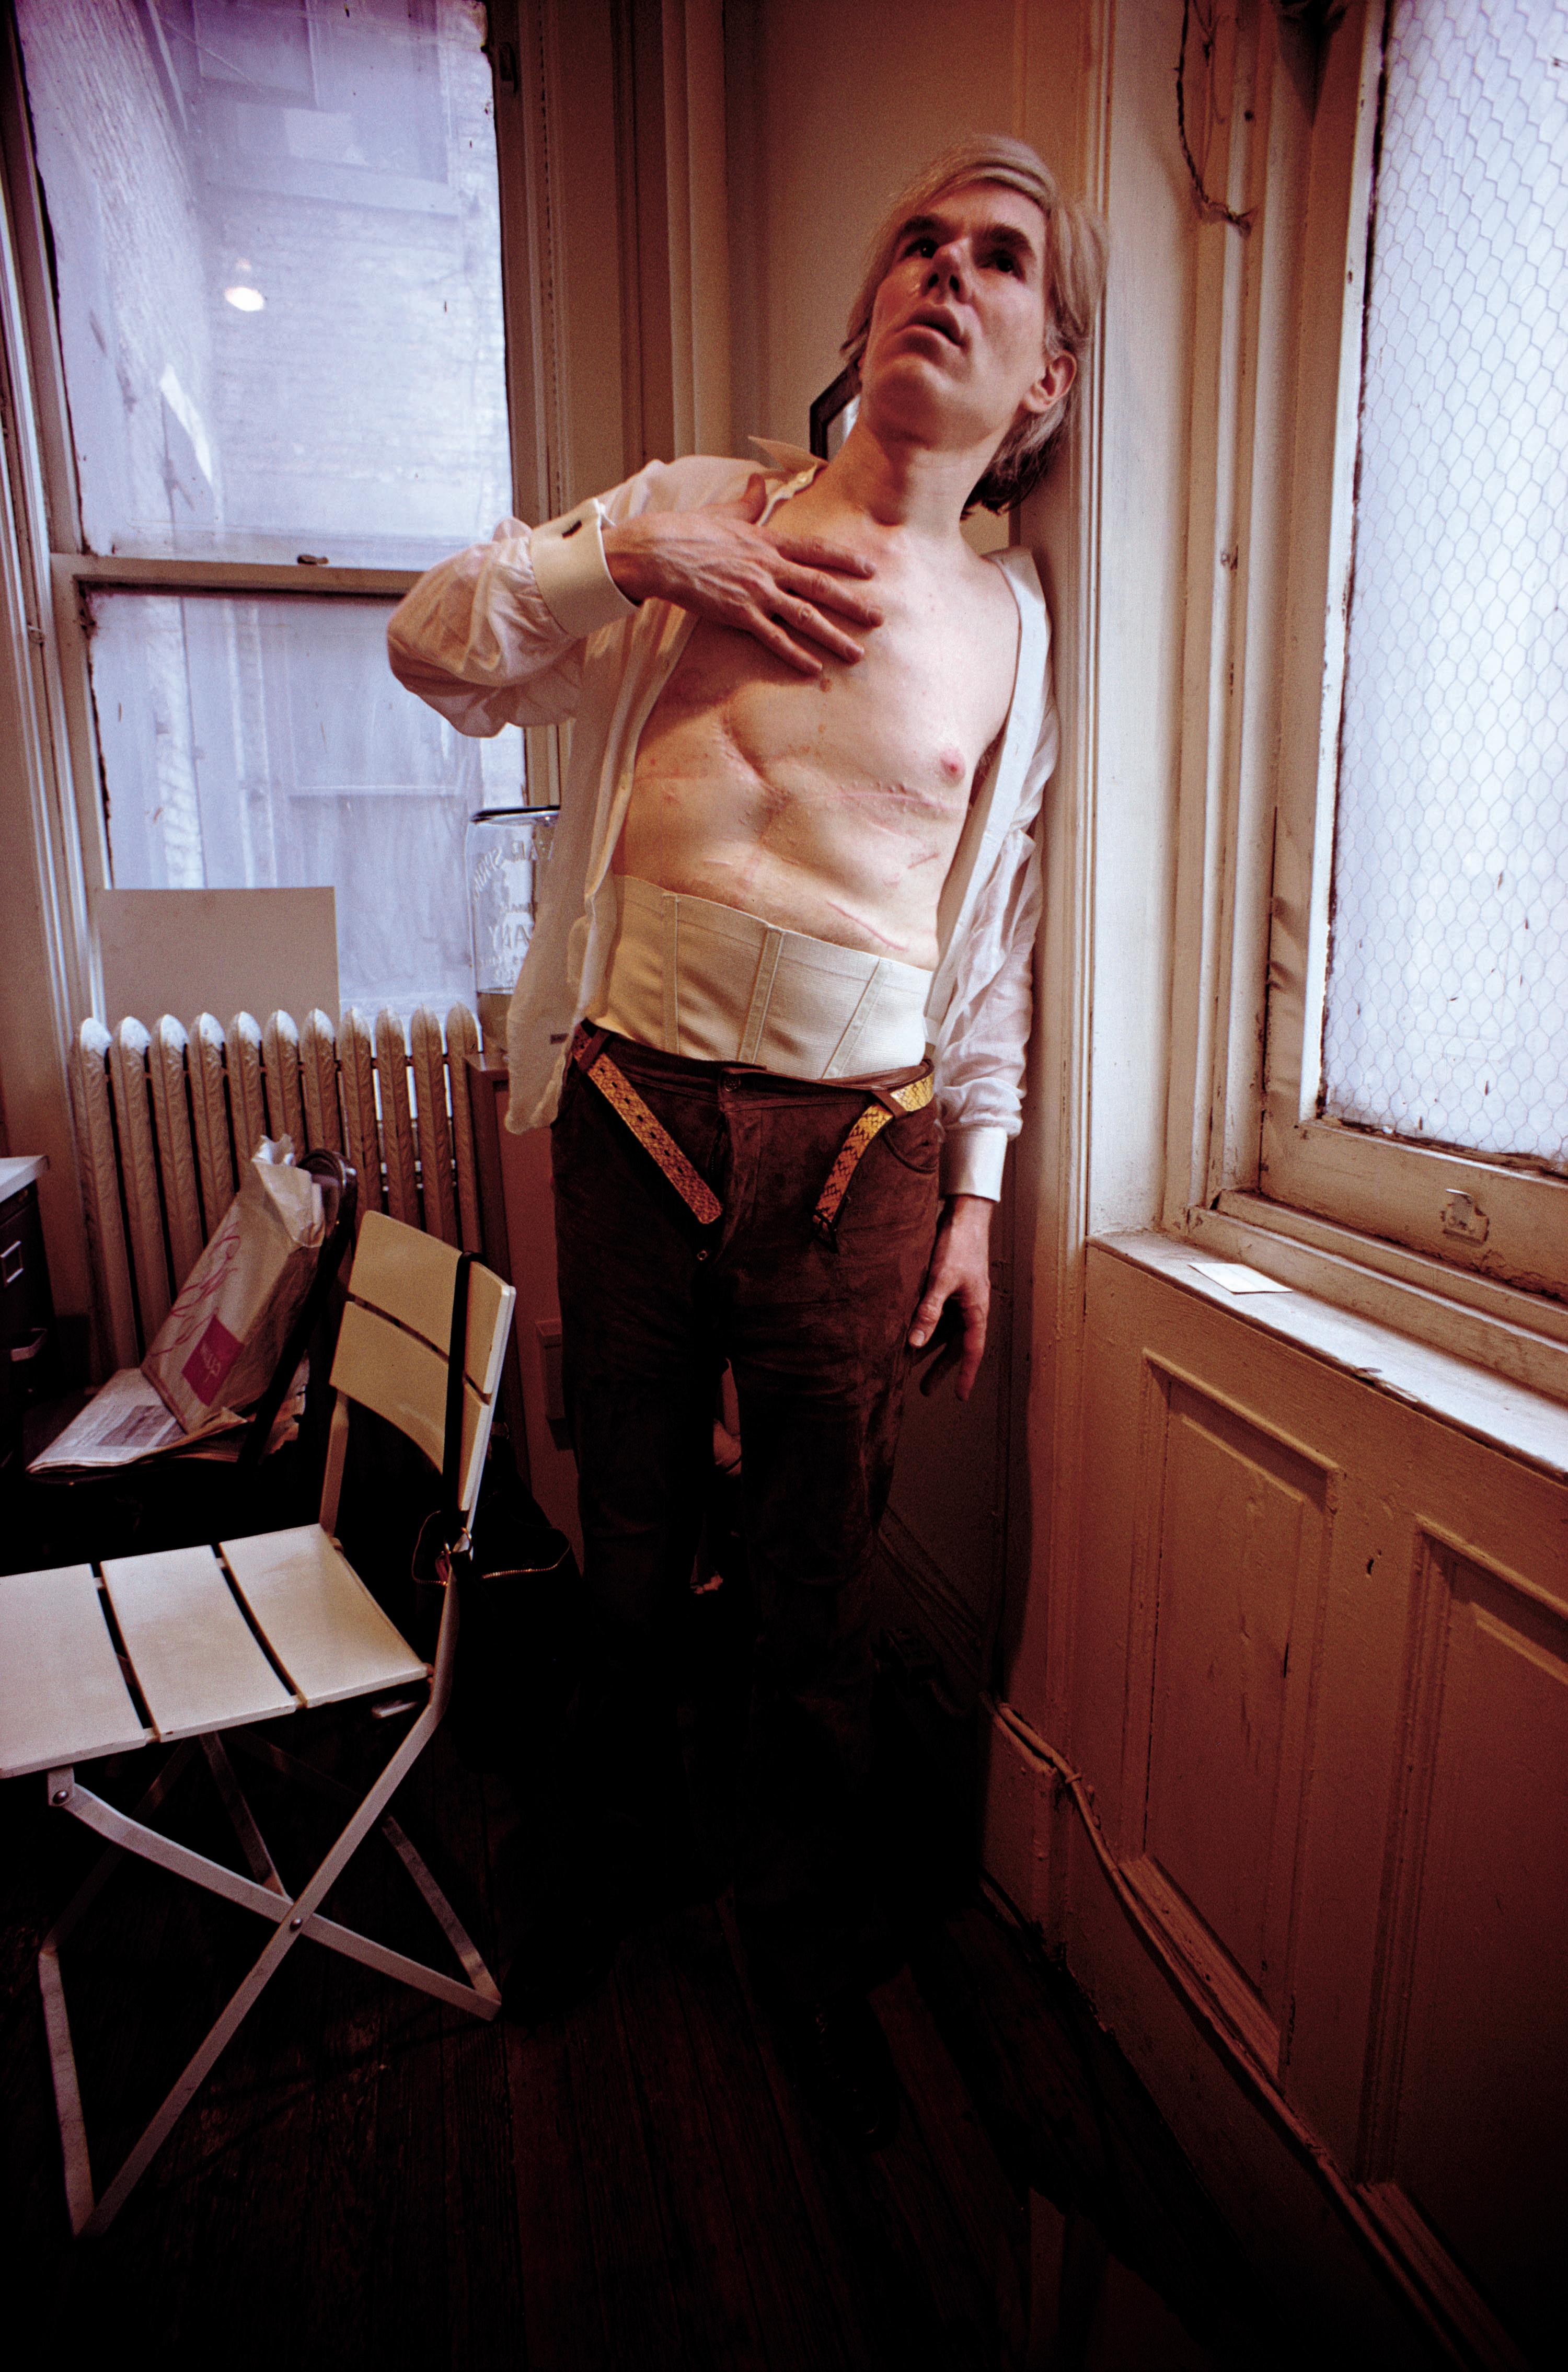 David Montgomery (photographer) Color Photograph - Andy Warhol’s Shooting Scars, The Factory